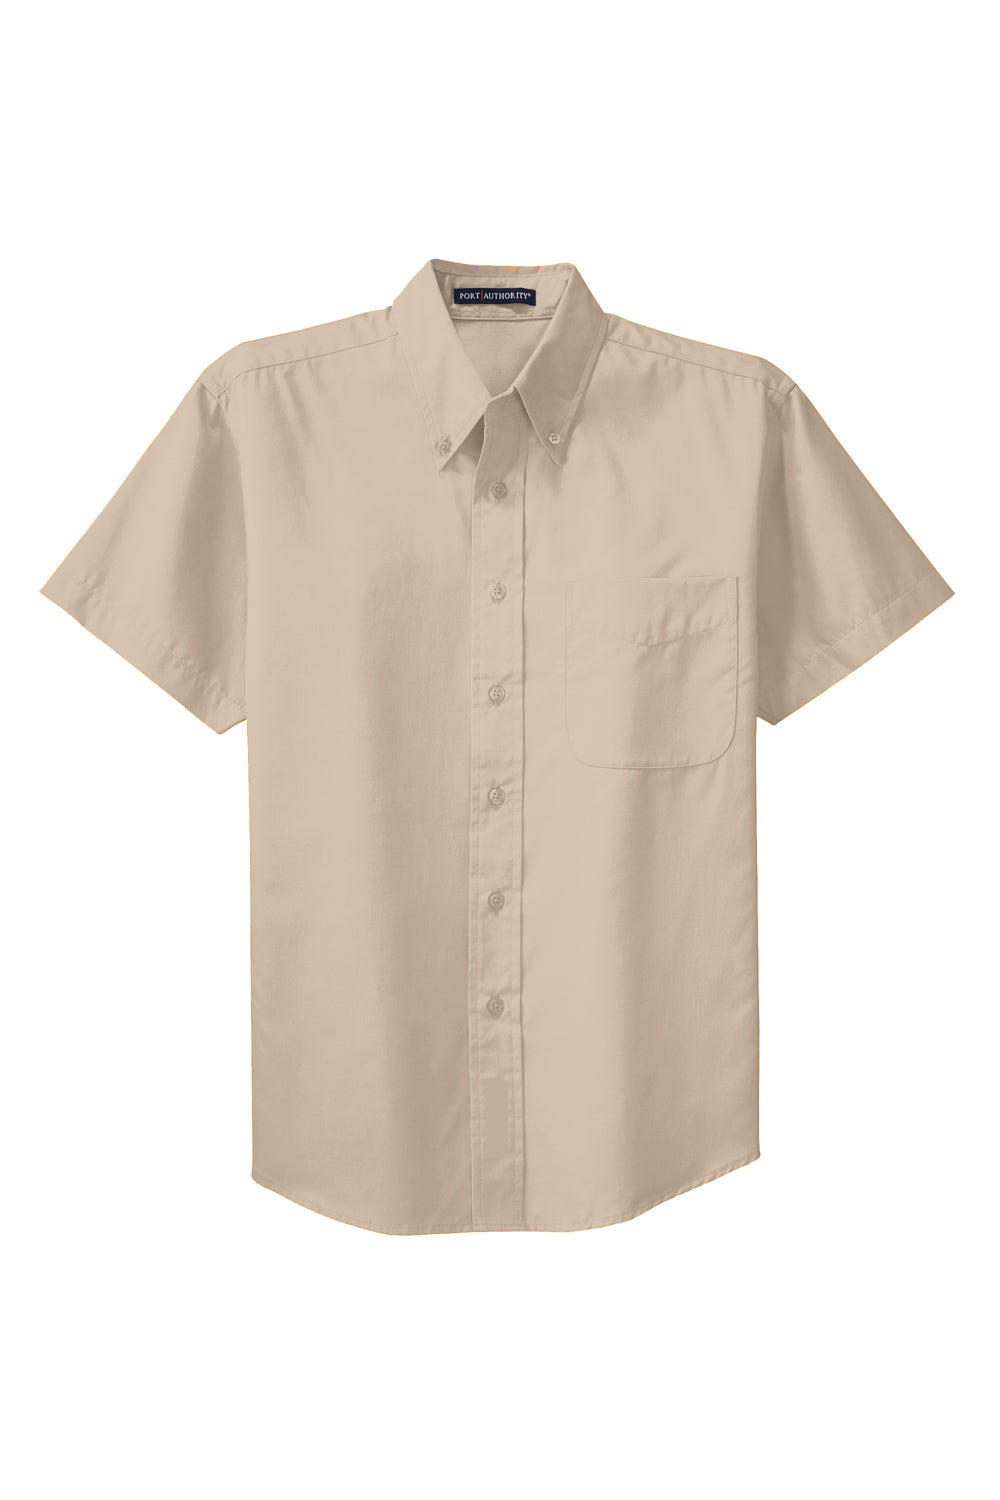 Port Authority S508/TLS508 Mens Easy Care Wrinkle Resistant Short Sleeve Button Down Shirt w/ Pocket Stone Flat Front